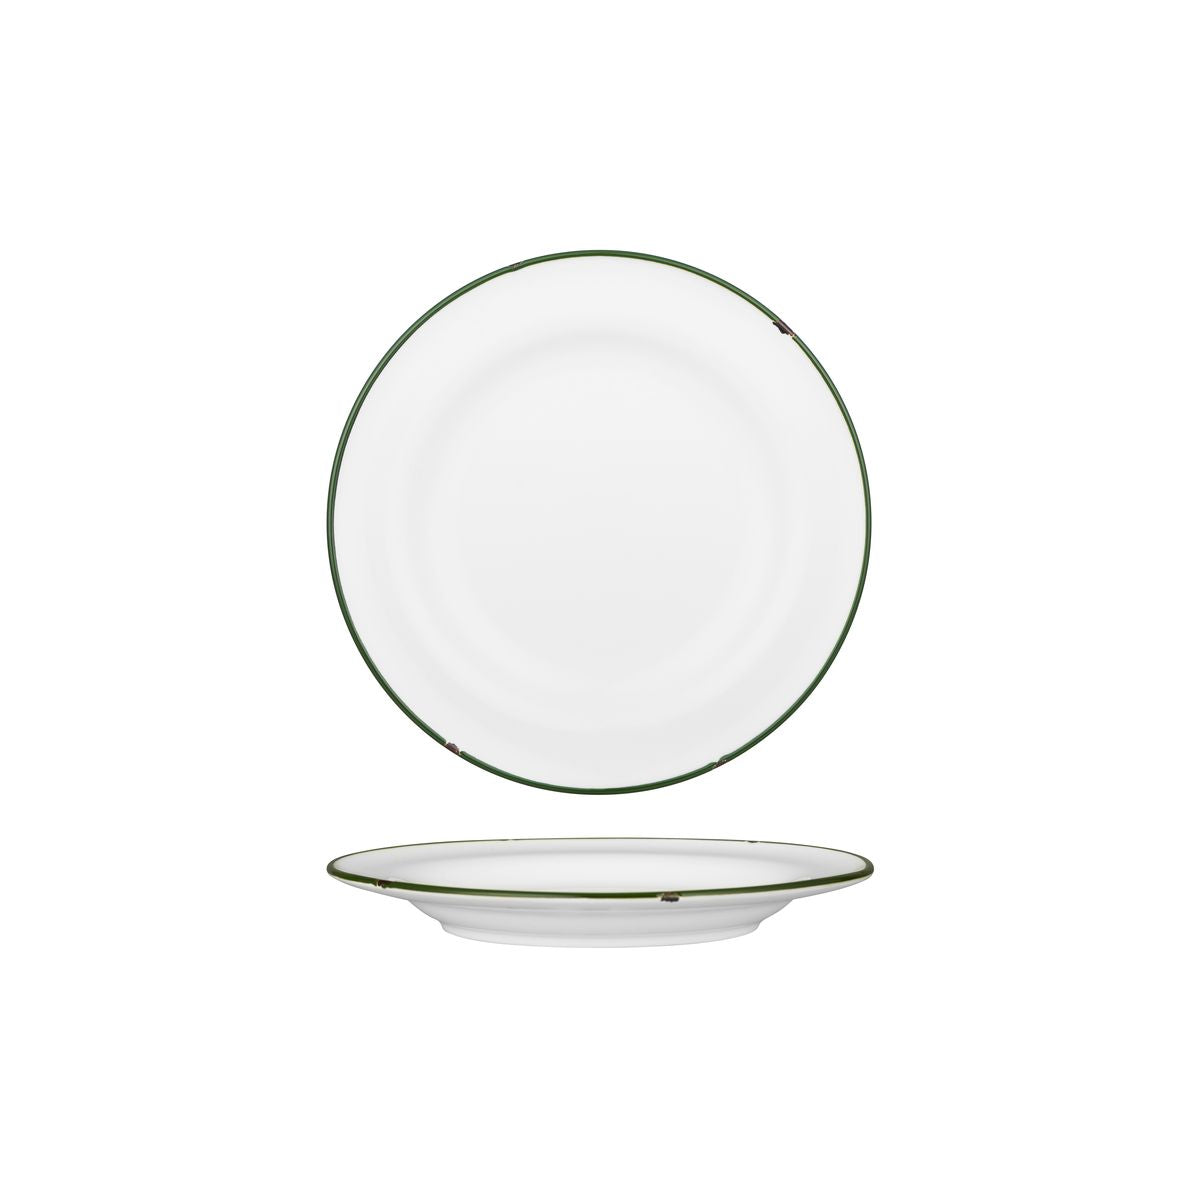 Round Plate - 210mm, Tintin White & Green from Luzerne. made out of Ceramic and sold in boxes of 12. Hospitality quality at wholesale price with The Flying Fork! 